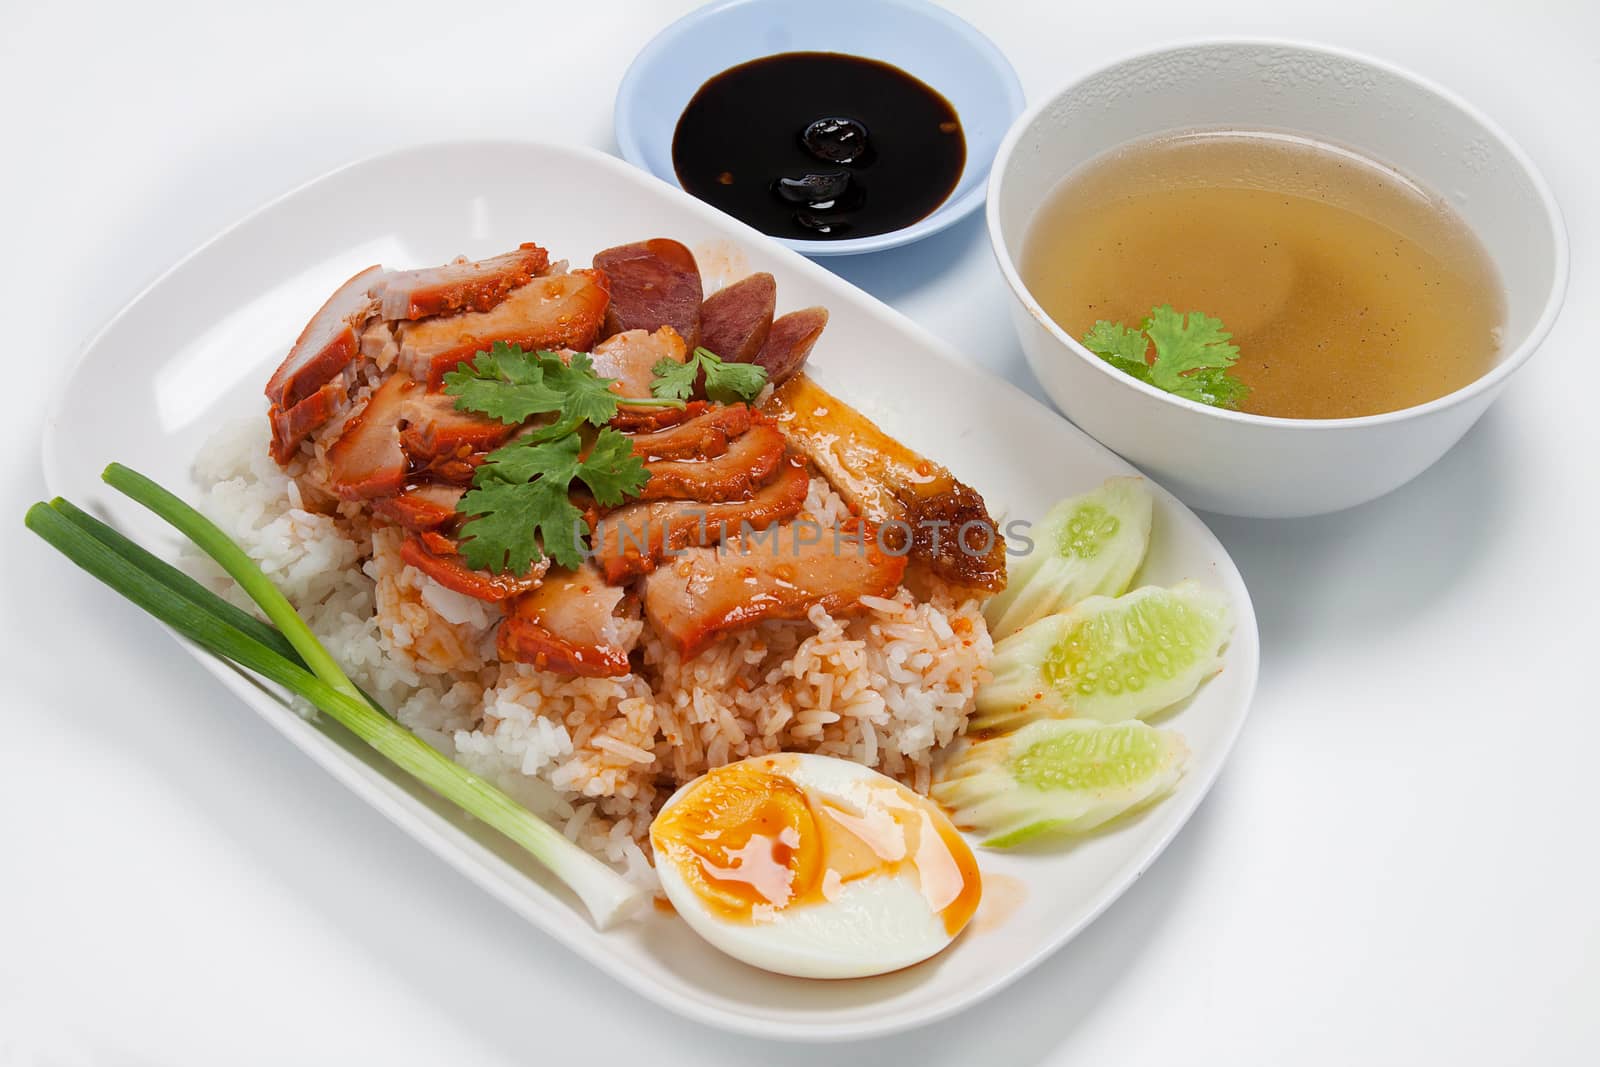 Barbecued red pork in sauce with rice, Chinese style roasted pork.